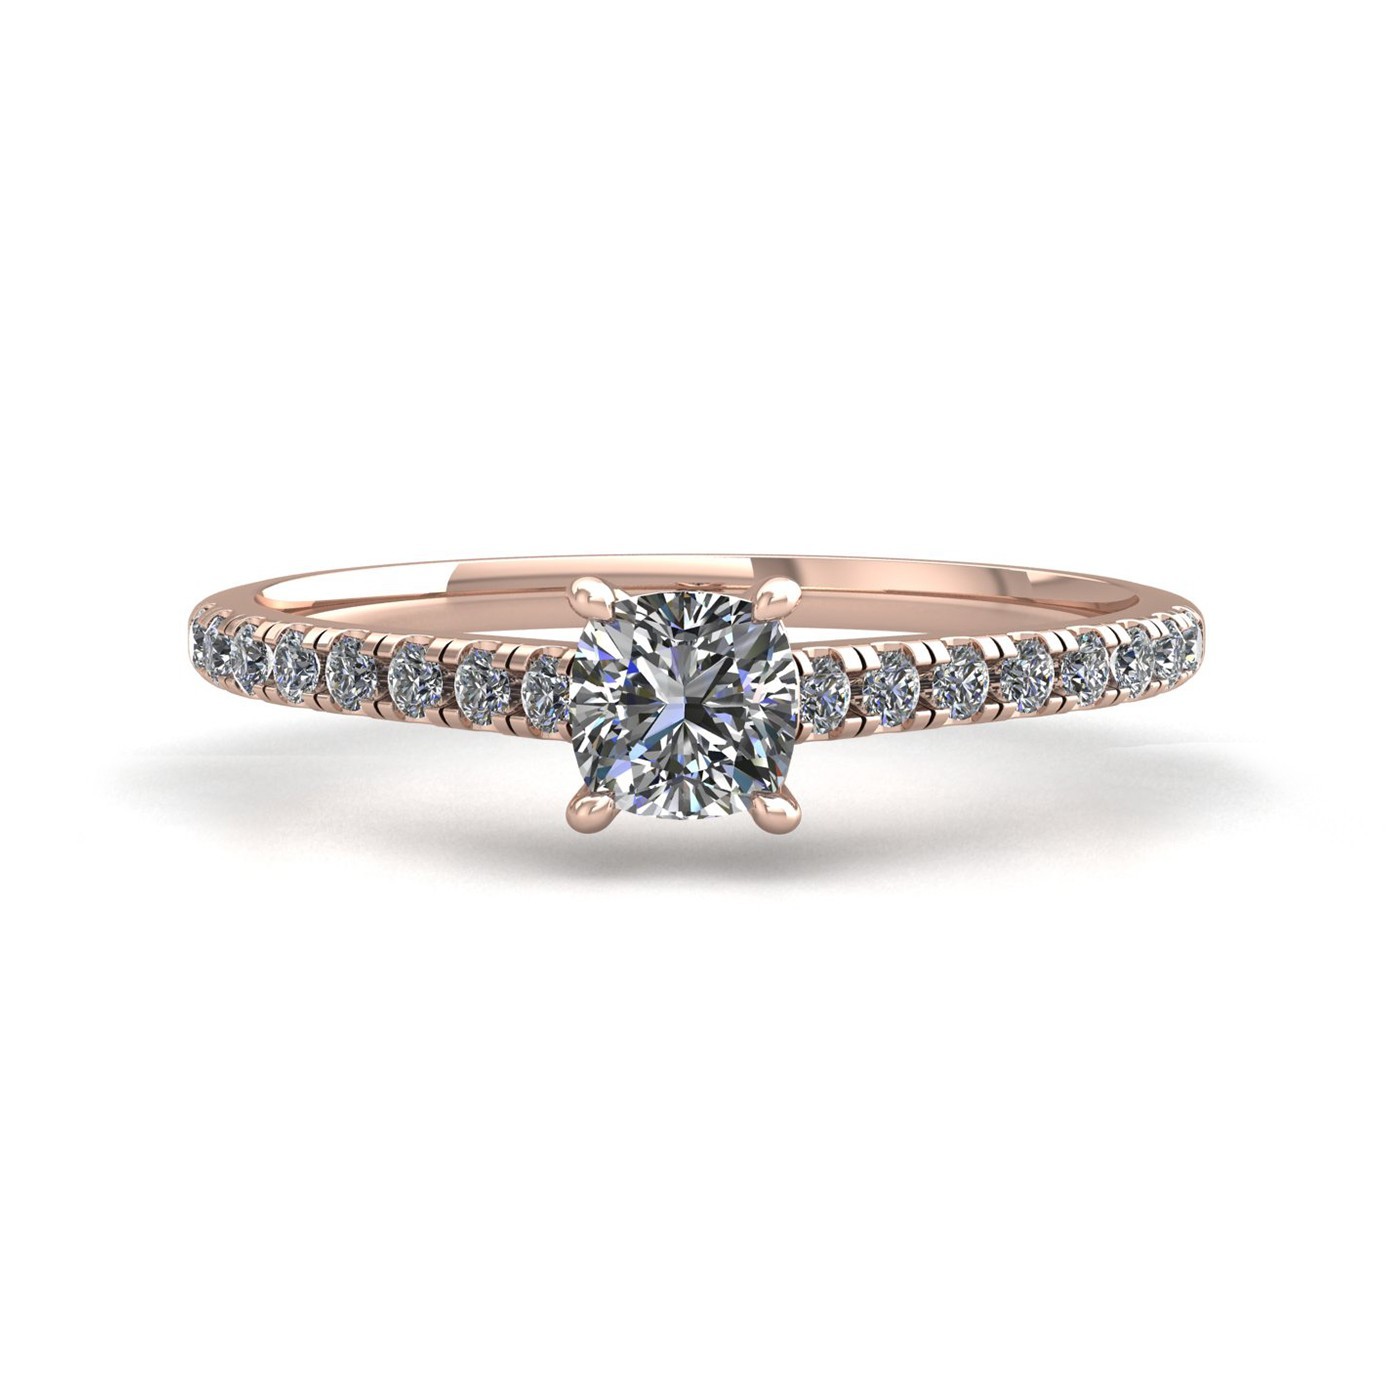 18k rose gold  0,50 ct 4 prongs cushion cut diamond engagement ring with whisper thin pavÉ set band Photos & images